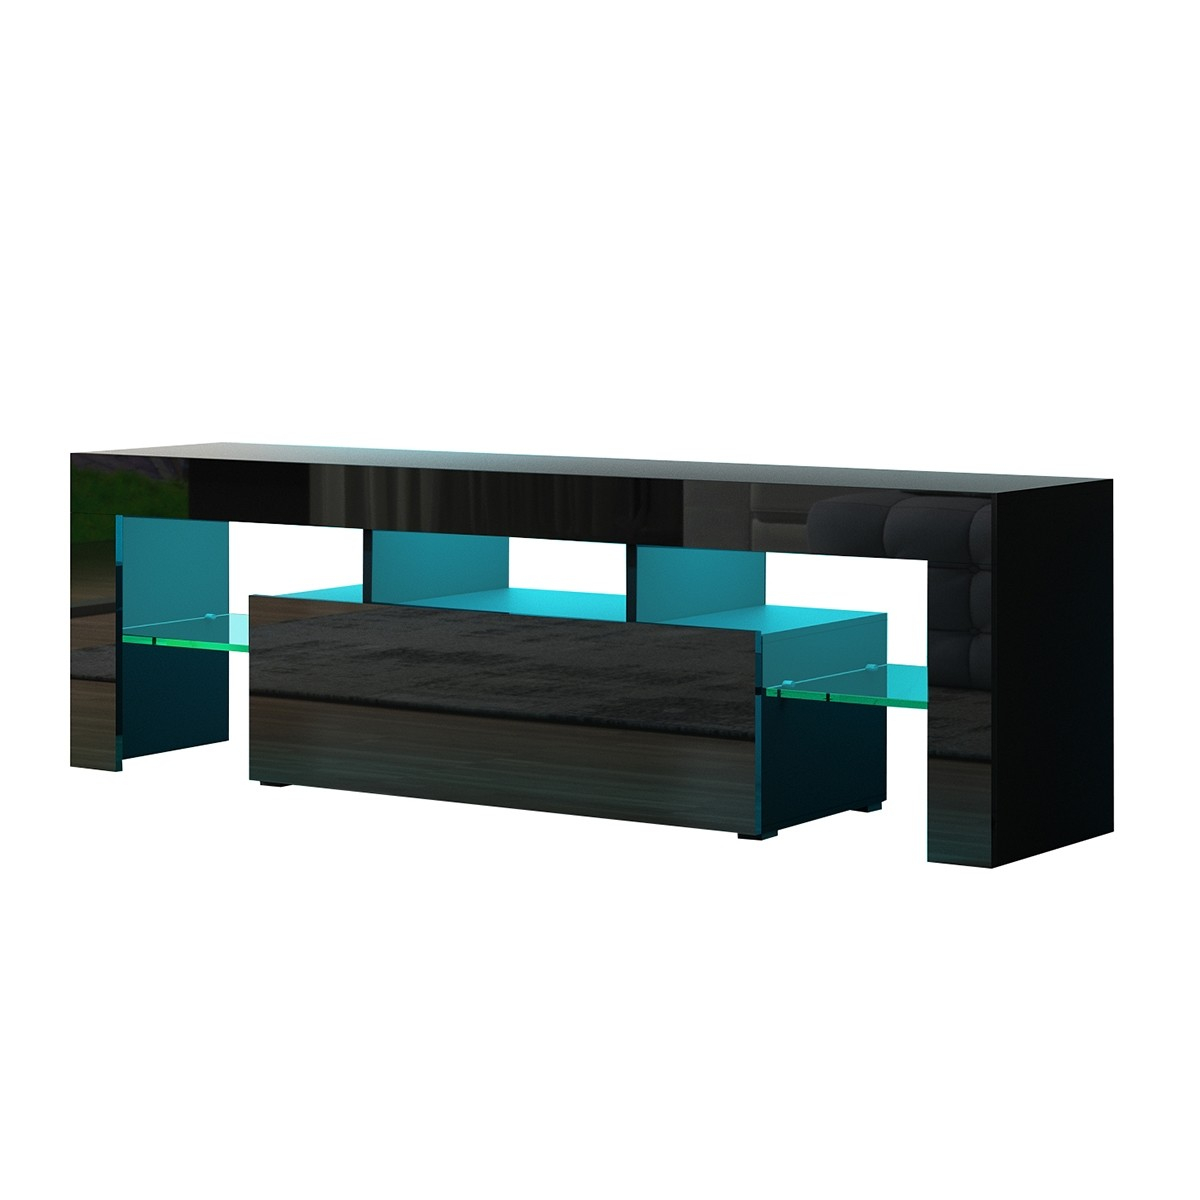 Gloss LED TV Wood Cabinet - Two Colours Available